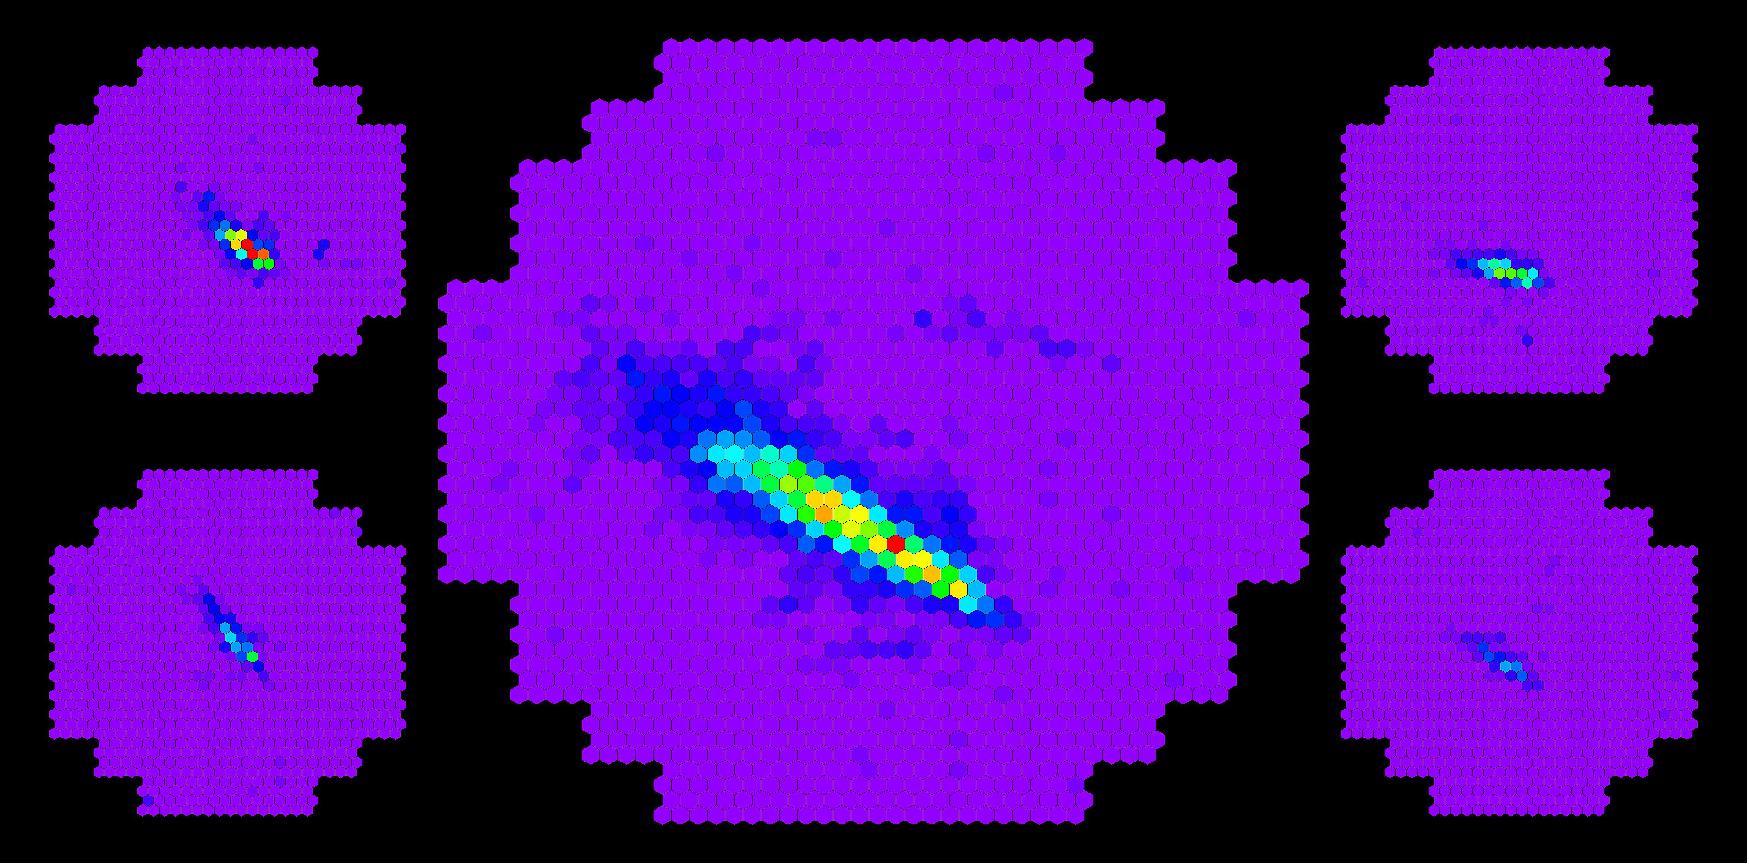 Figure 6: Images of particle cascades viewed simultaneously by the H.E.S.S. II telescope (center) and by the H.E.S.S. I telescopes (sides). Color encodes light intensity. The images illustrate the dramatically improved intensity and resolution with which H.E.S.S. II views the particle cascades. The H.E.S.S. I cameras are shown in reduced size (image credit: H.E.S.S. Collaboration)